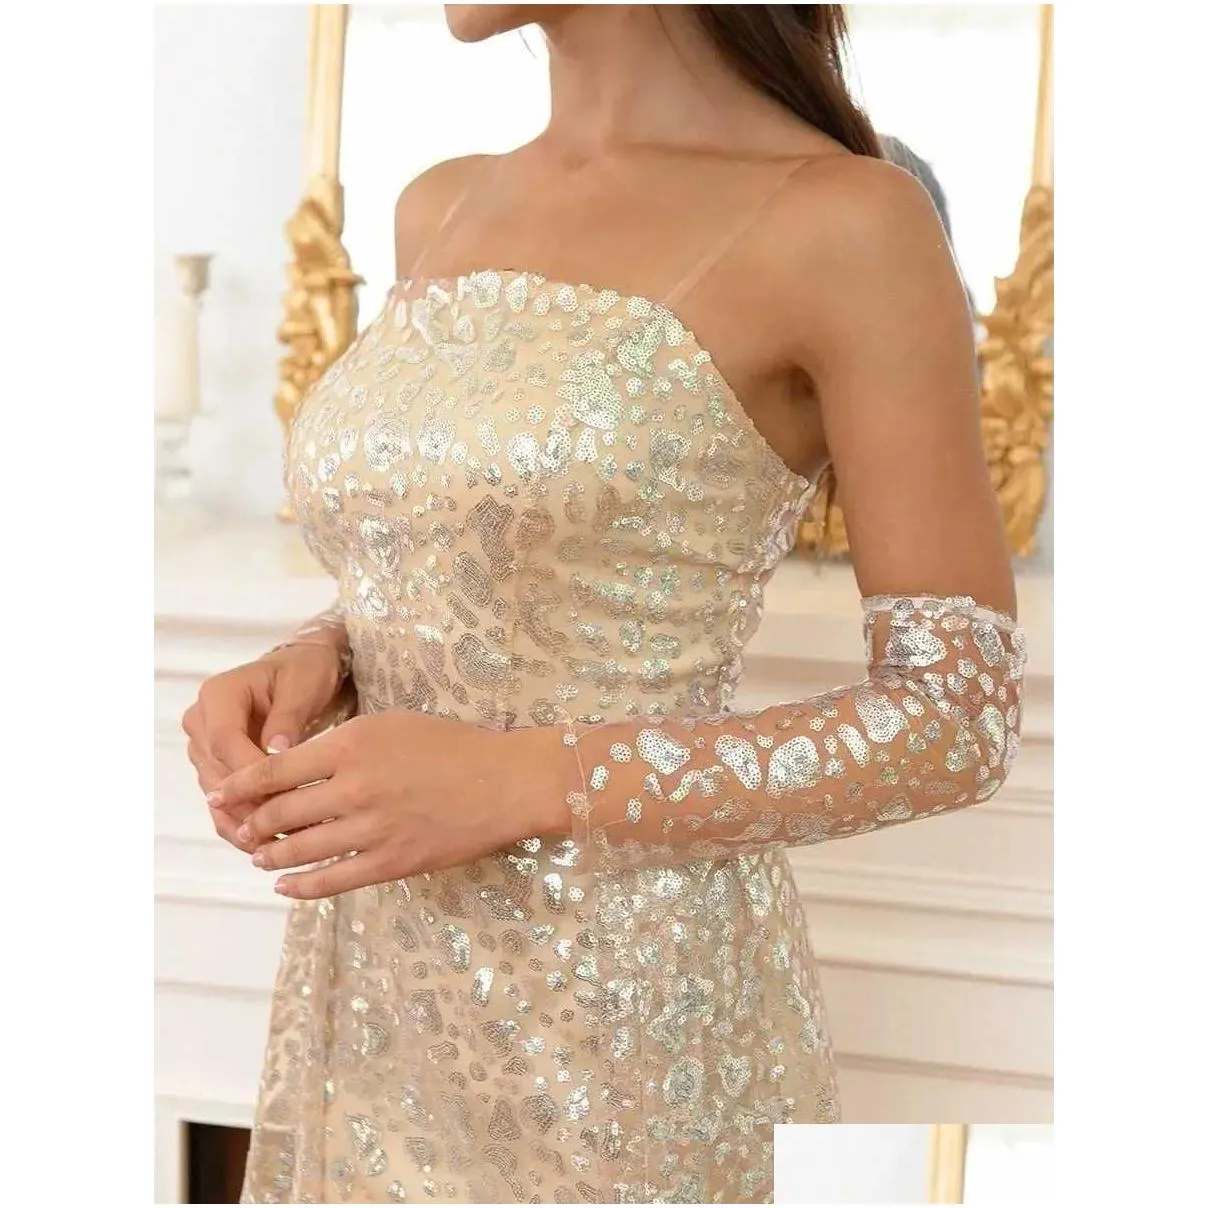 2022 autumn new arrival fashion sequins elegant gown long sleeved temperament see-through ladies evening dress vestidos